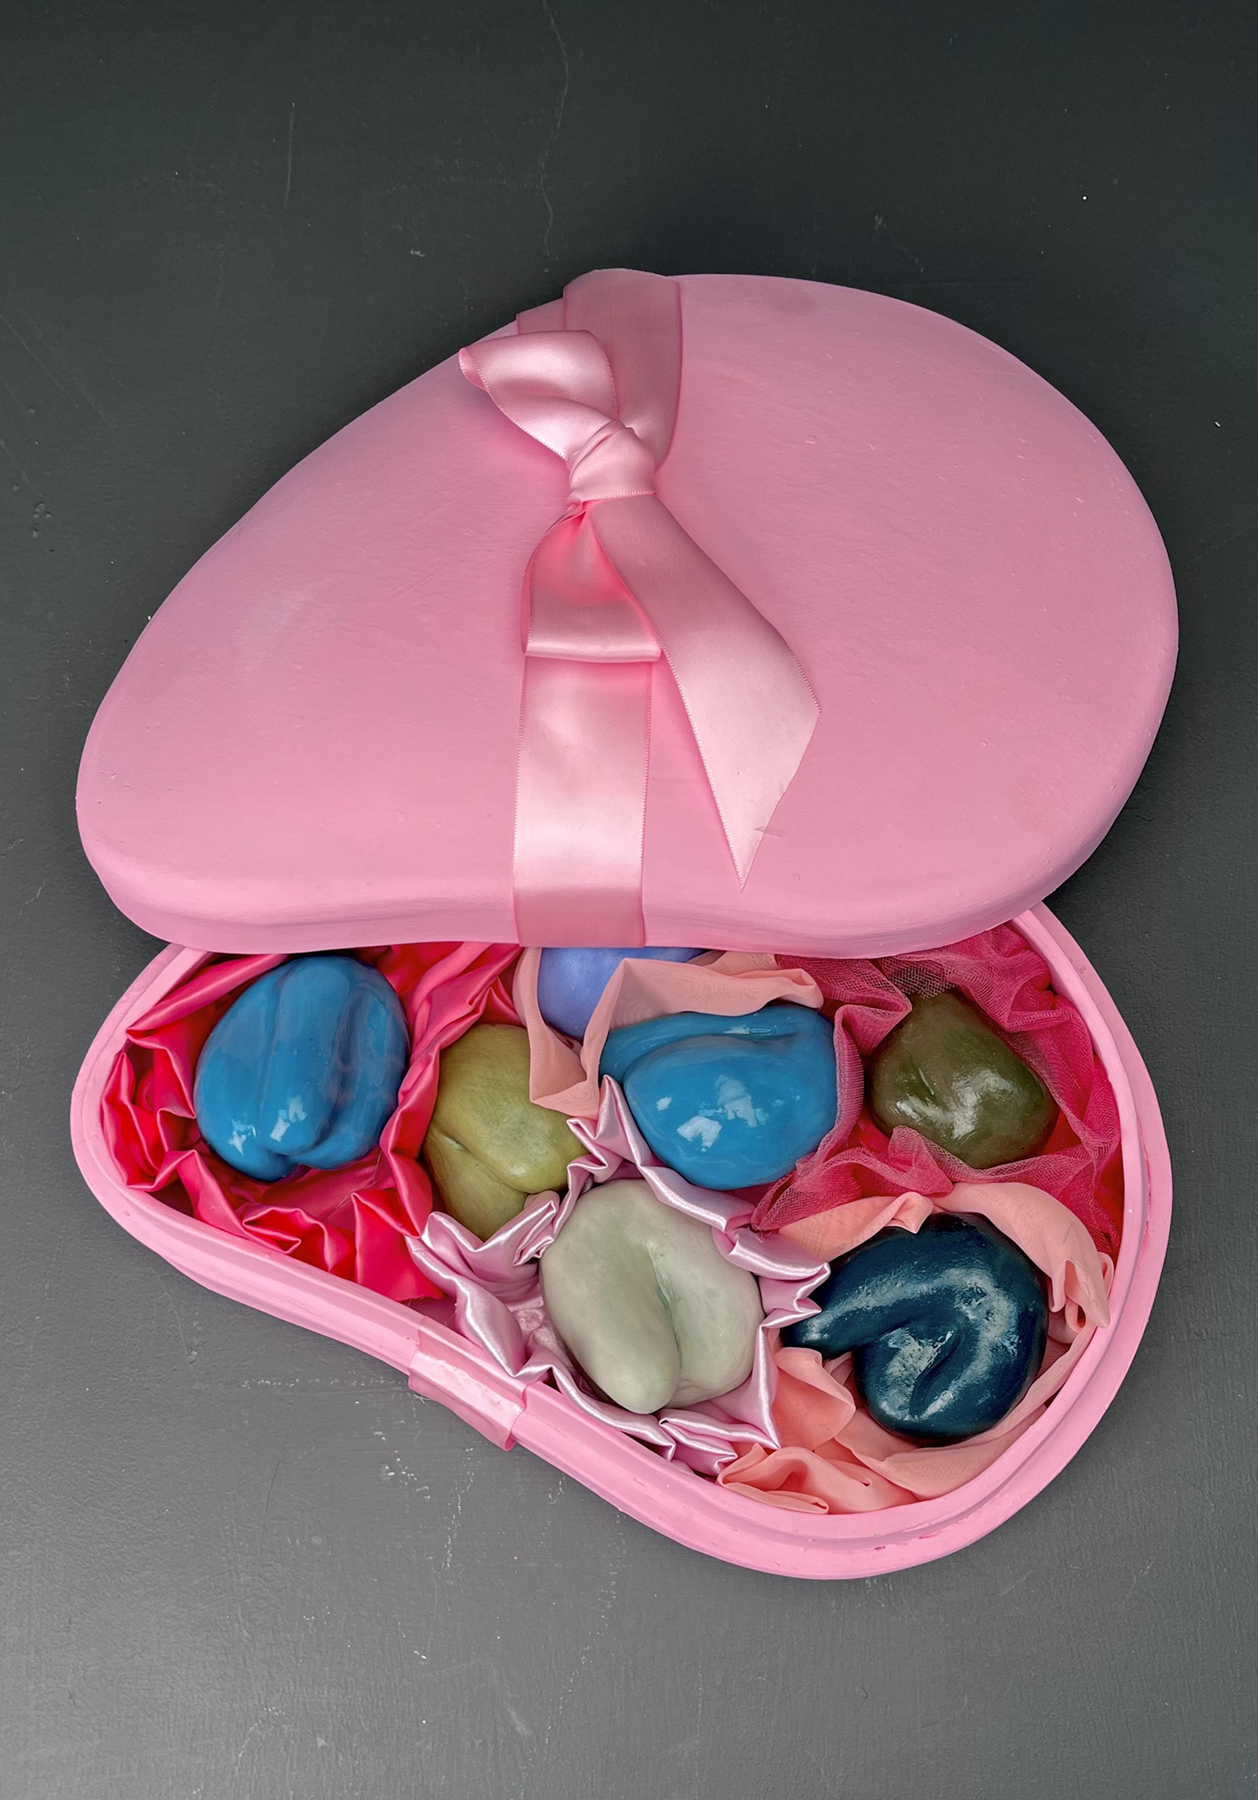 Conceptual ceramics piece showing the coddling of the male ego in a pink heart box, courtesy of the artist